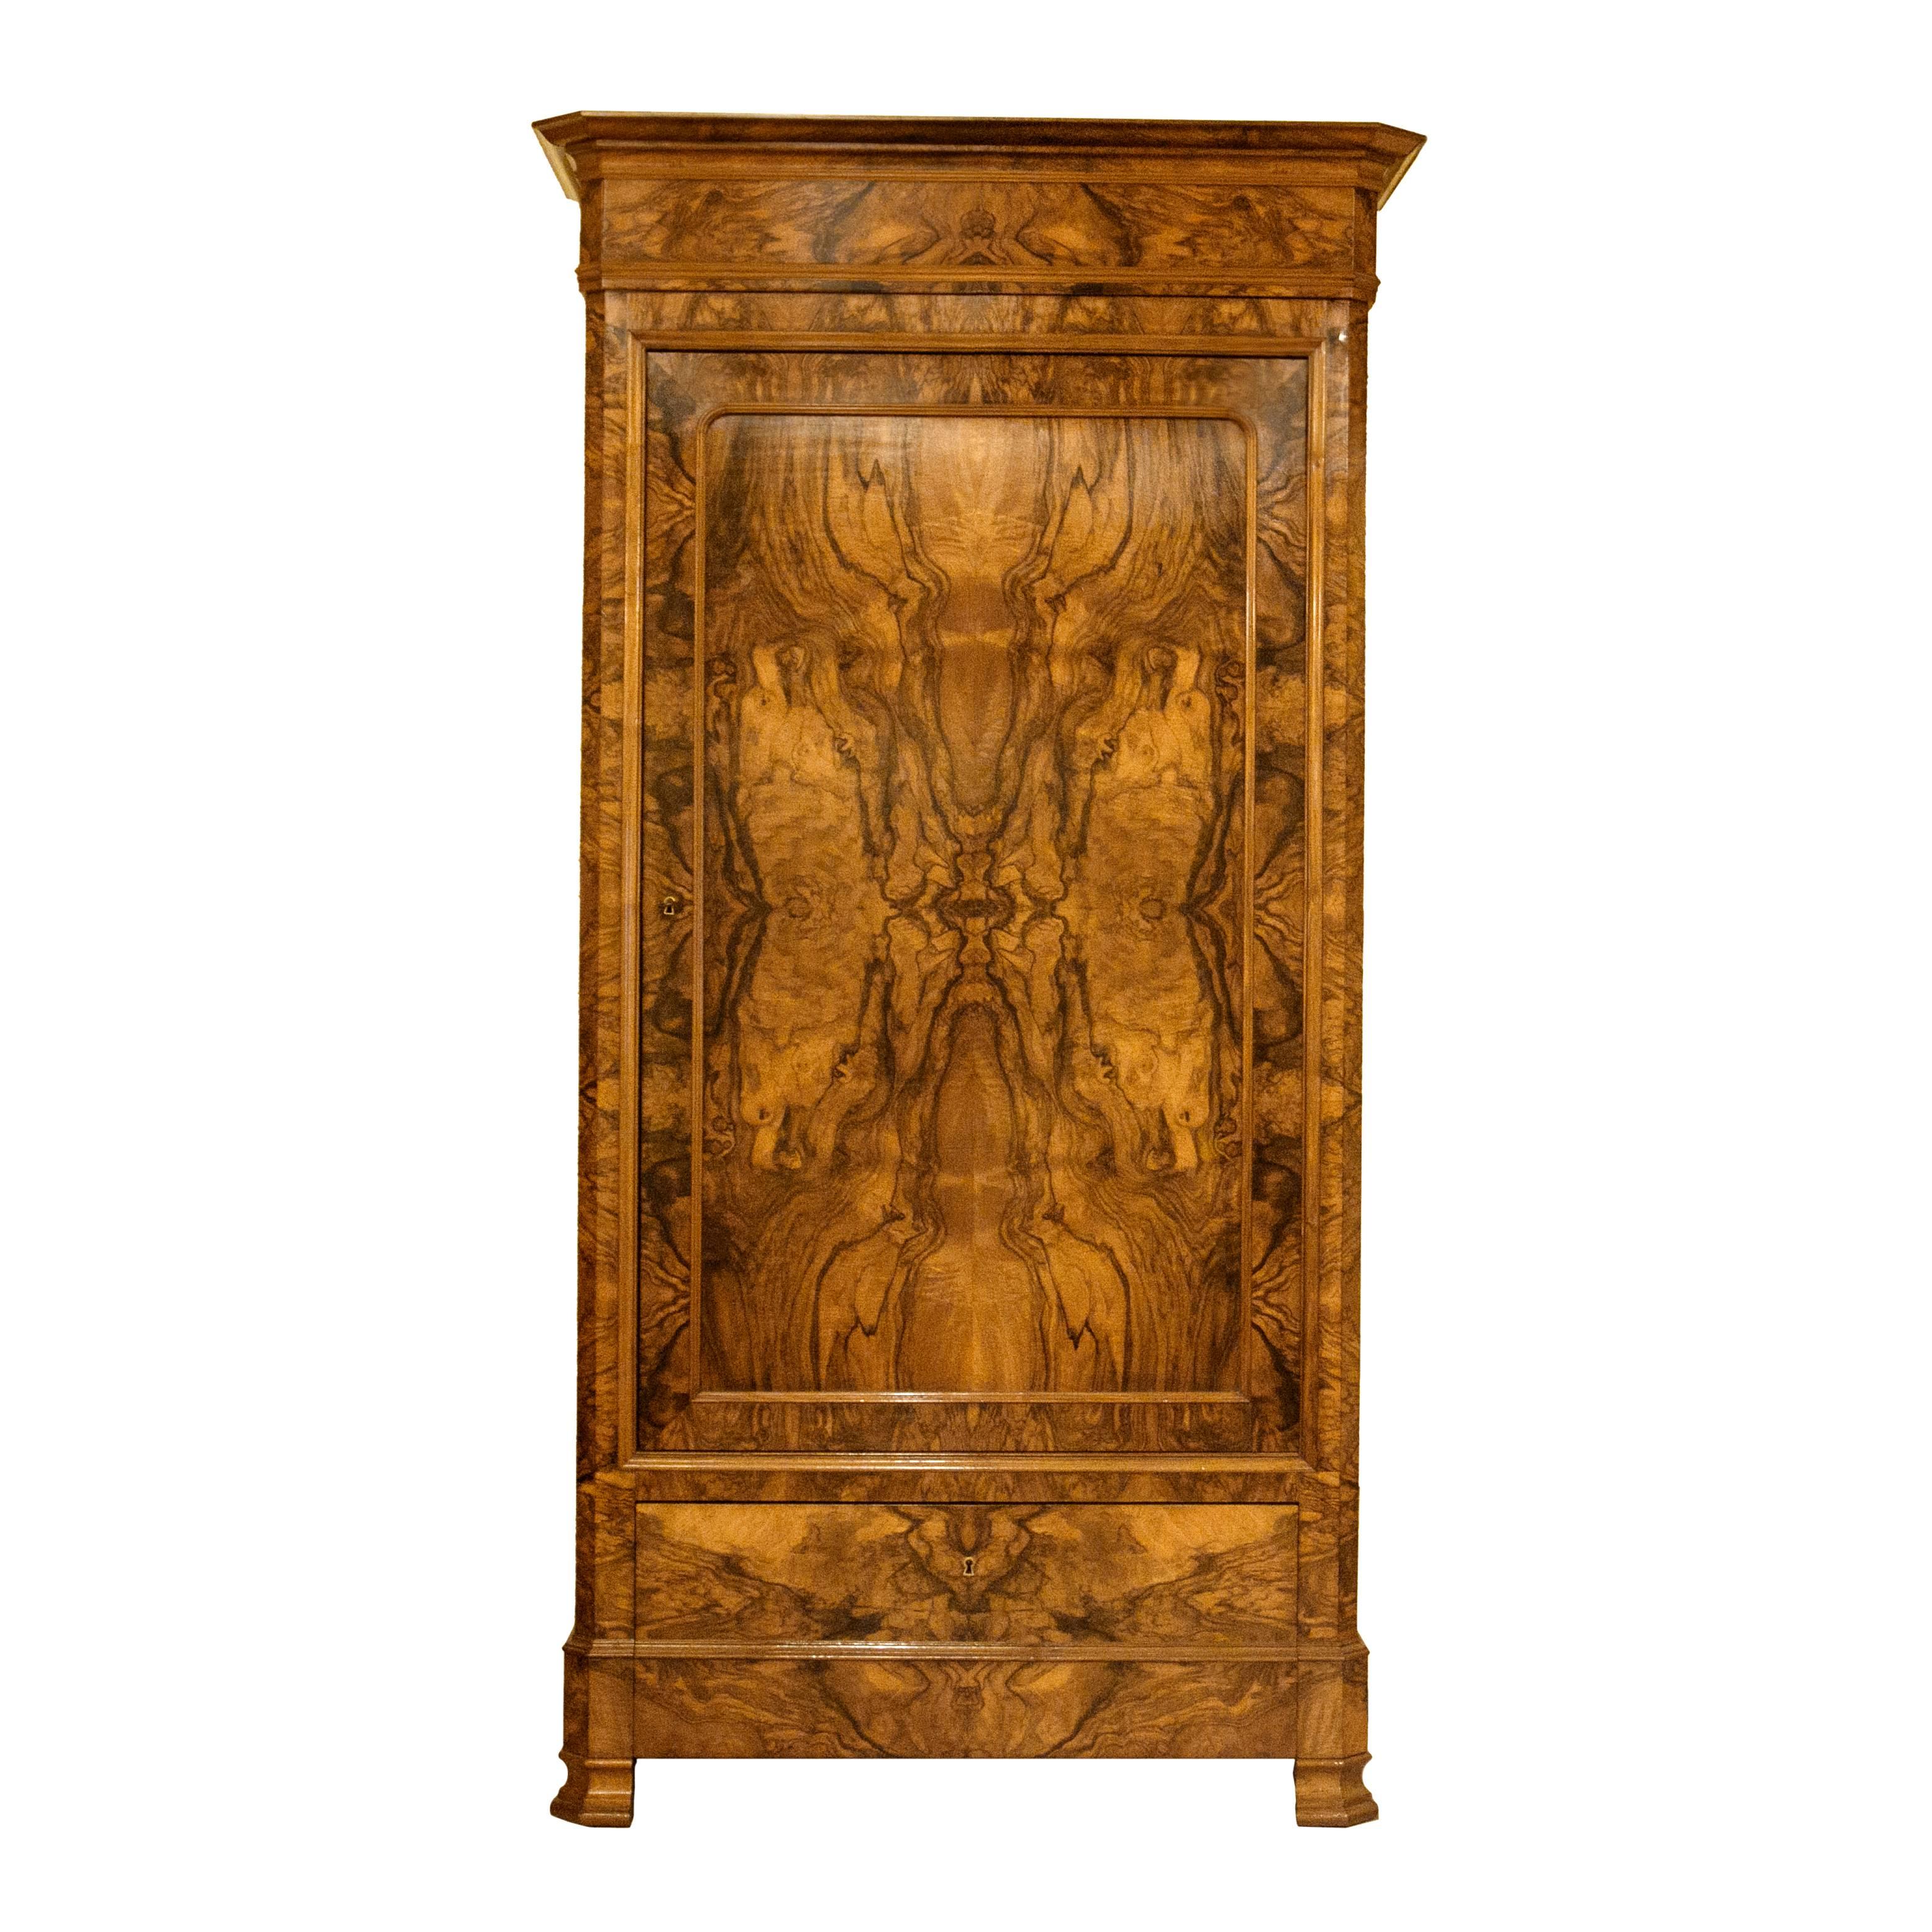 Period Louis Philippe Bonnetiere or Armoire of Bookmatched Burl Walnut